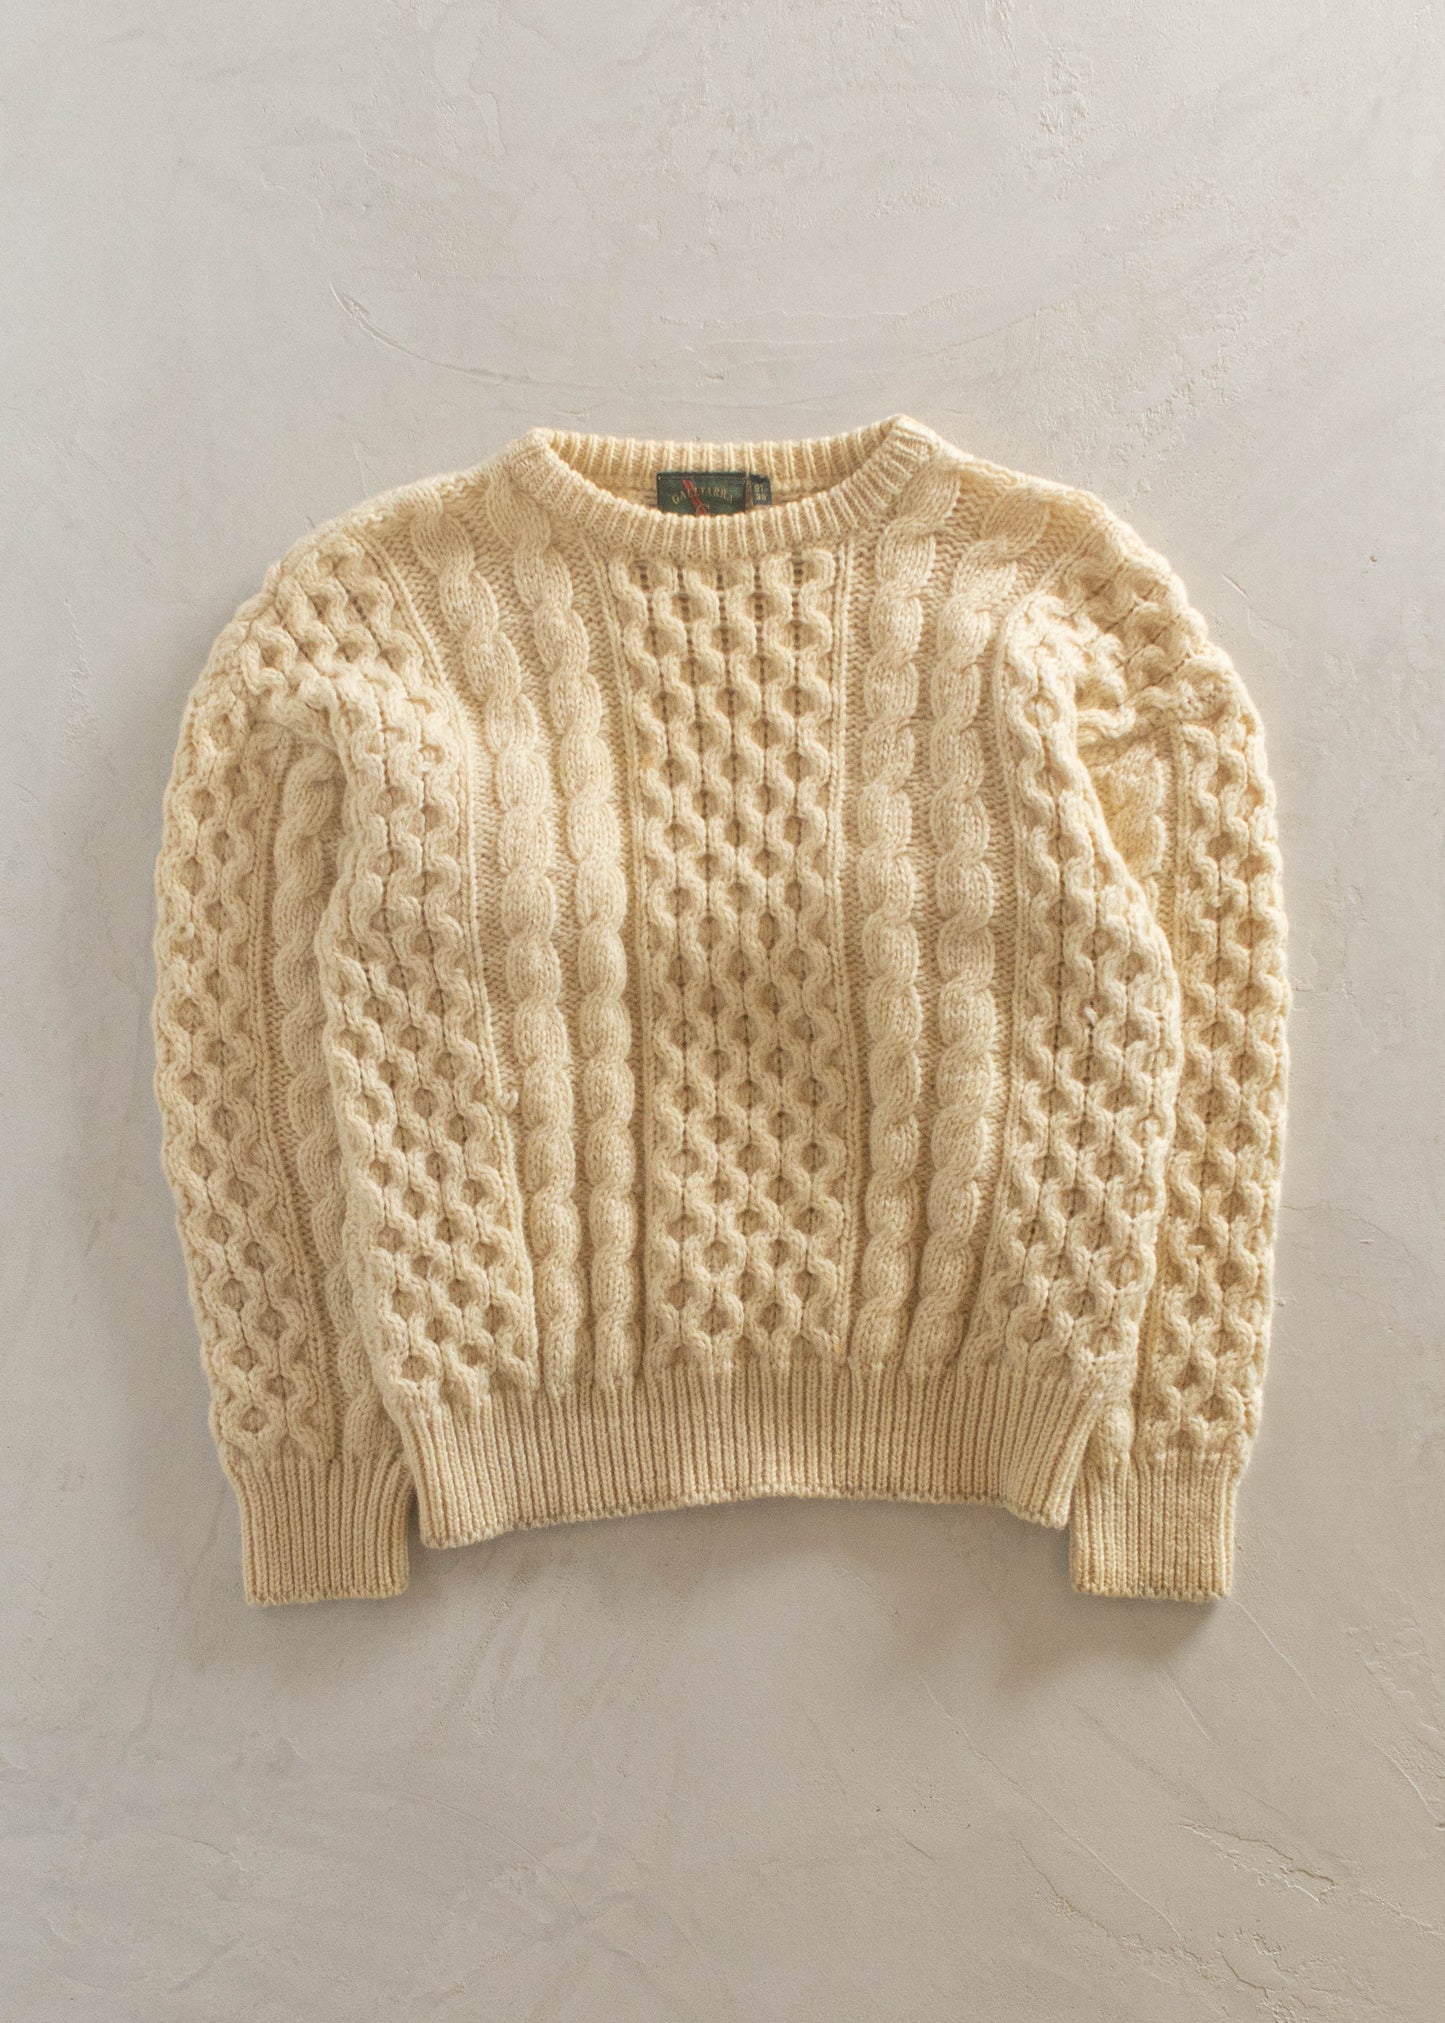 1980s Gaeltarra Cable Knit Wool Fisherman Sweater Size S/M